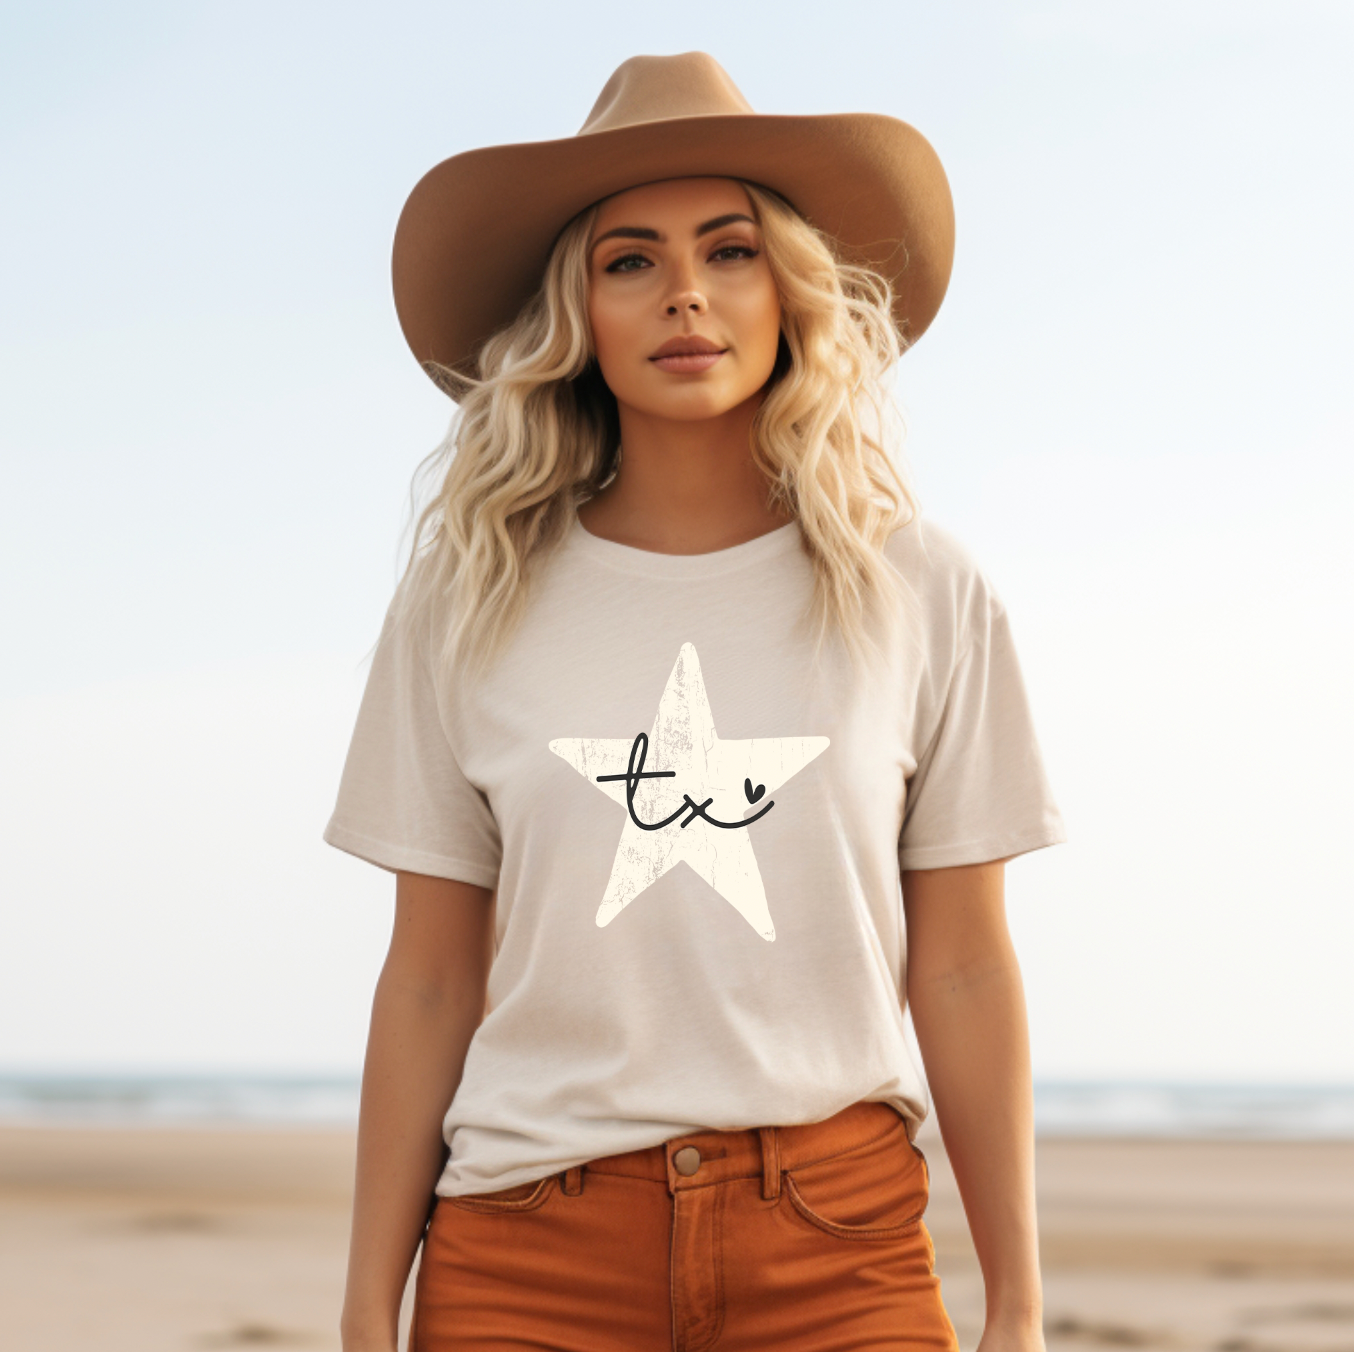 Cream colored soft shirt from Bella and Canvas, this shirt has a rustic star with Texas written in cursive with an adorable heart.